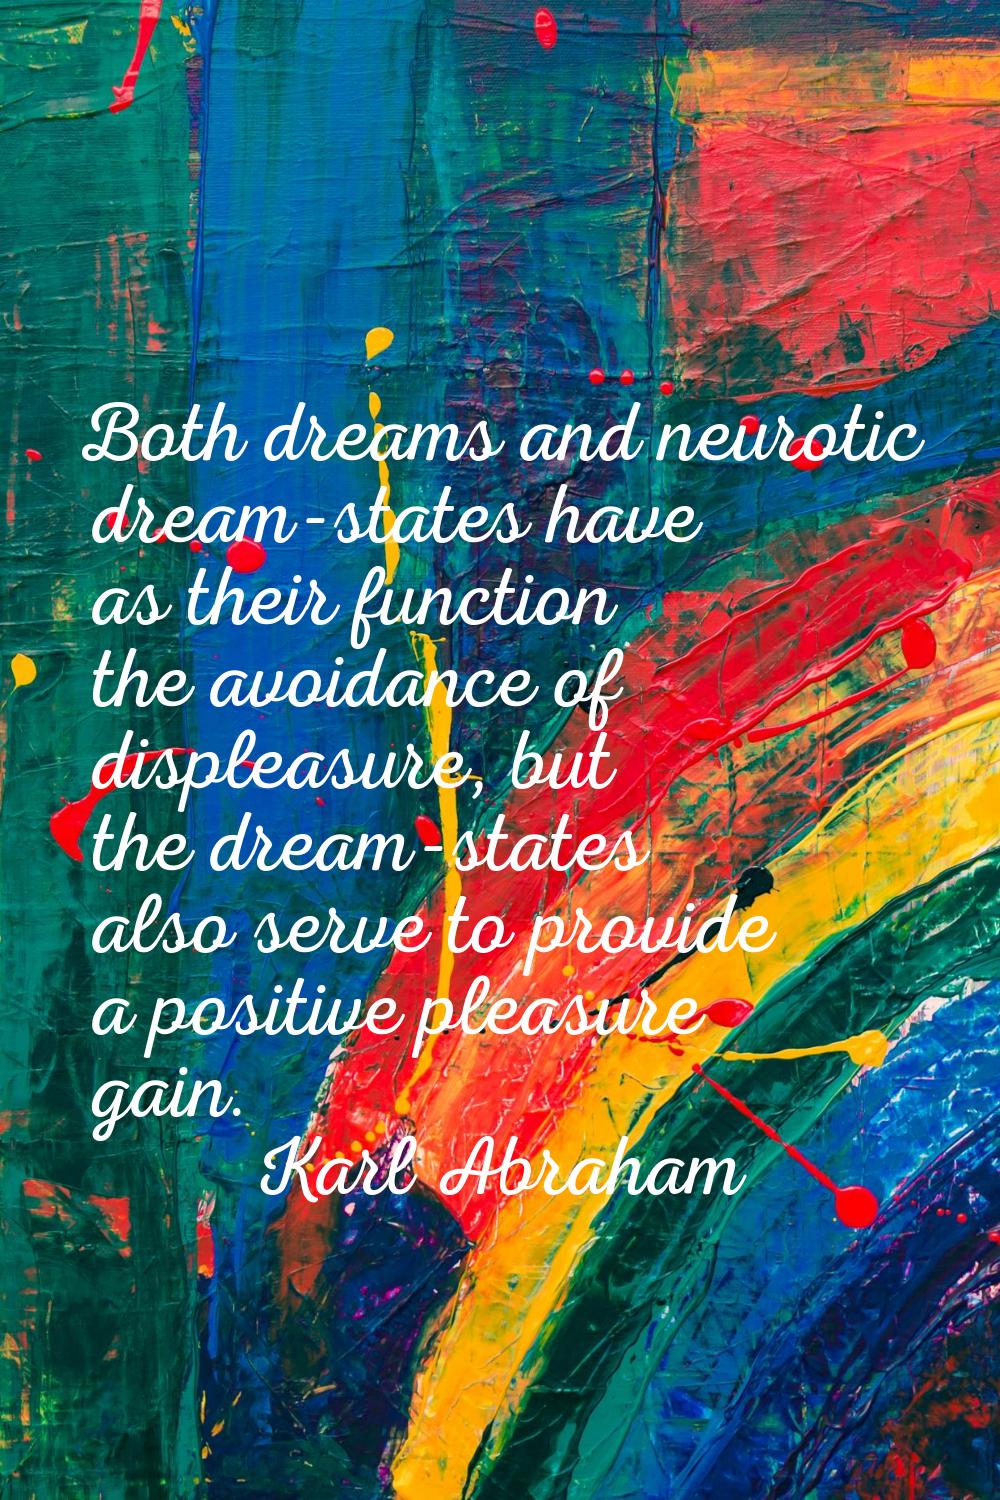 Both dreams and neurotic dream-states have as their function the avoidance of displeasure, but the 